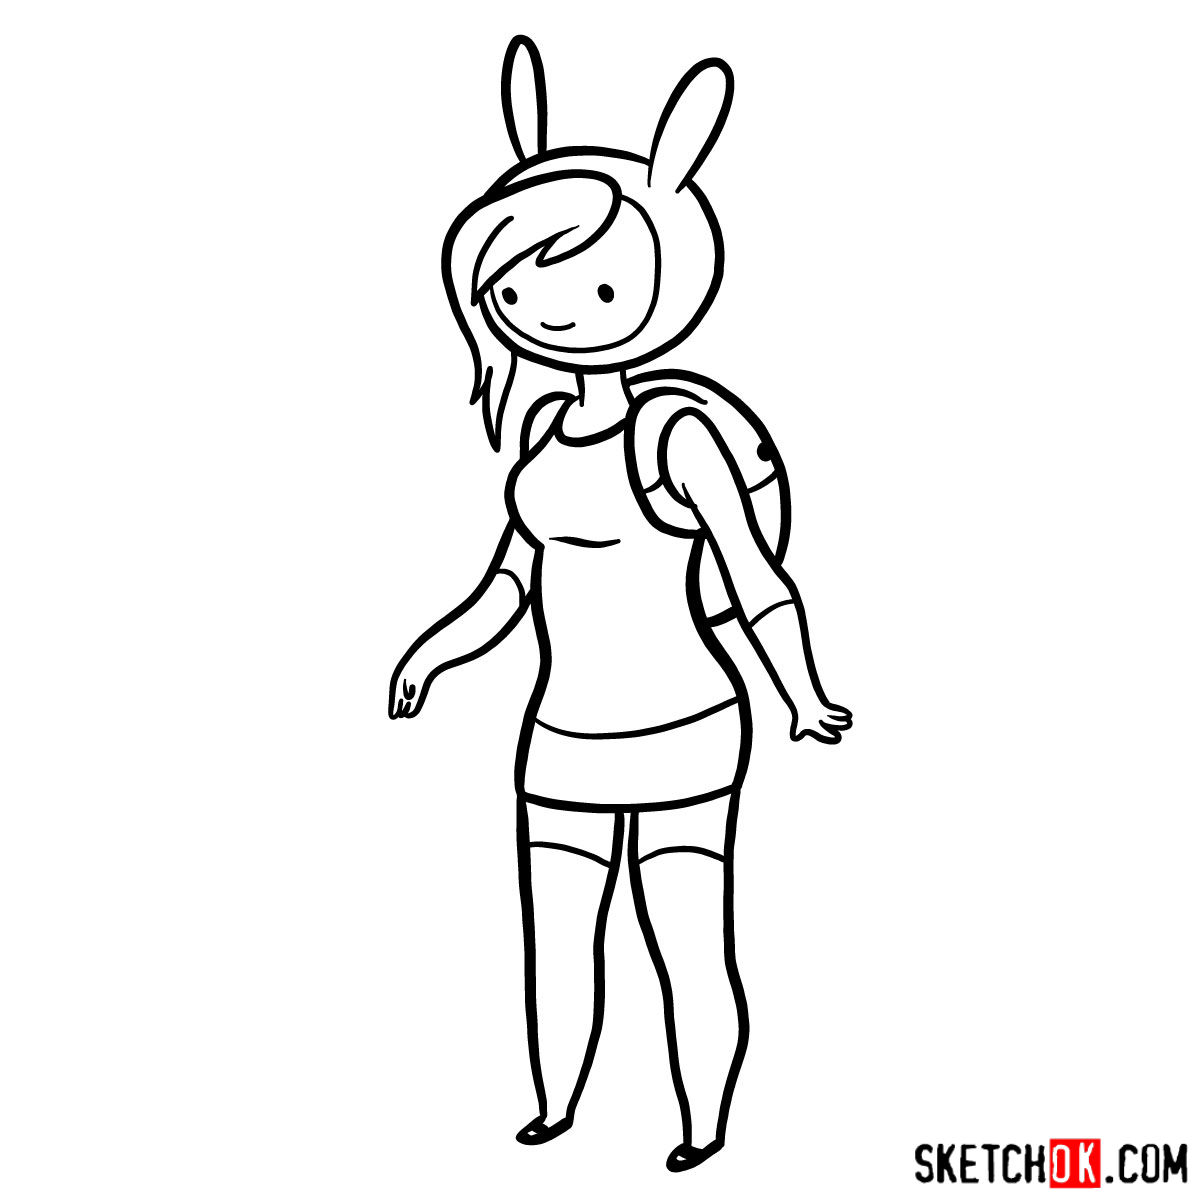 Fionna (Finn’s female version) coloring page – Free Printable PDF